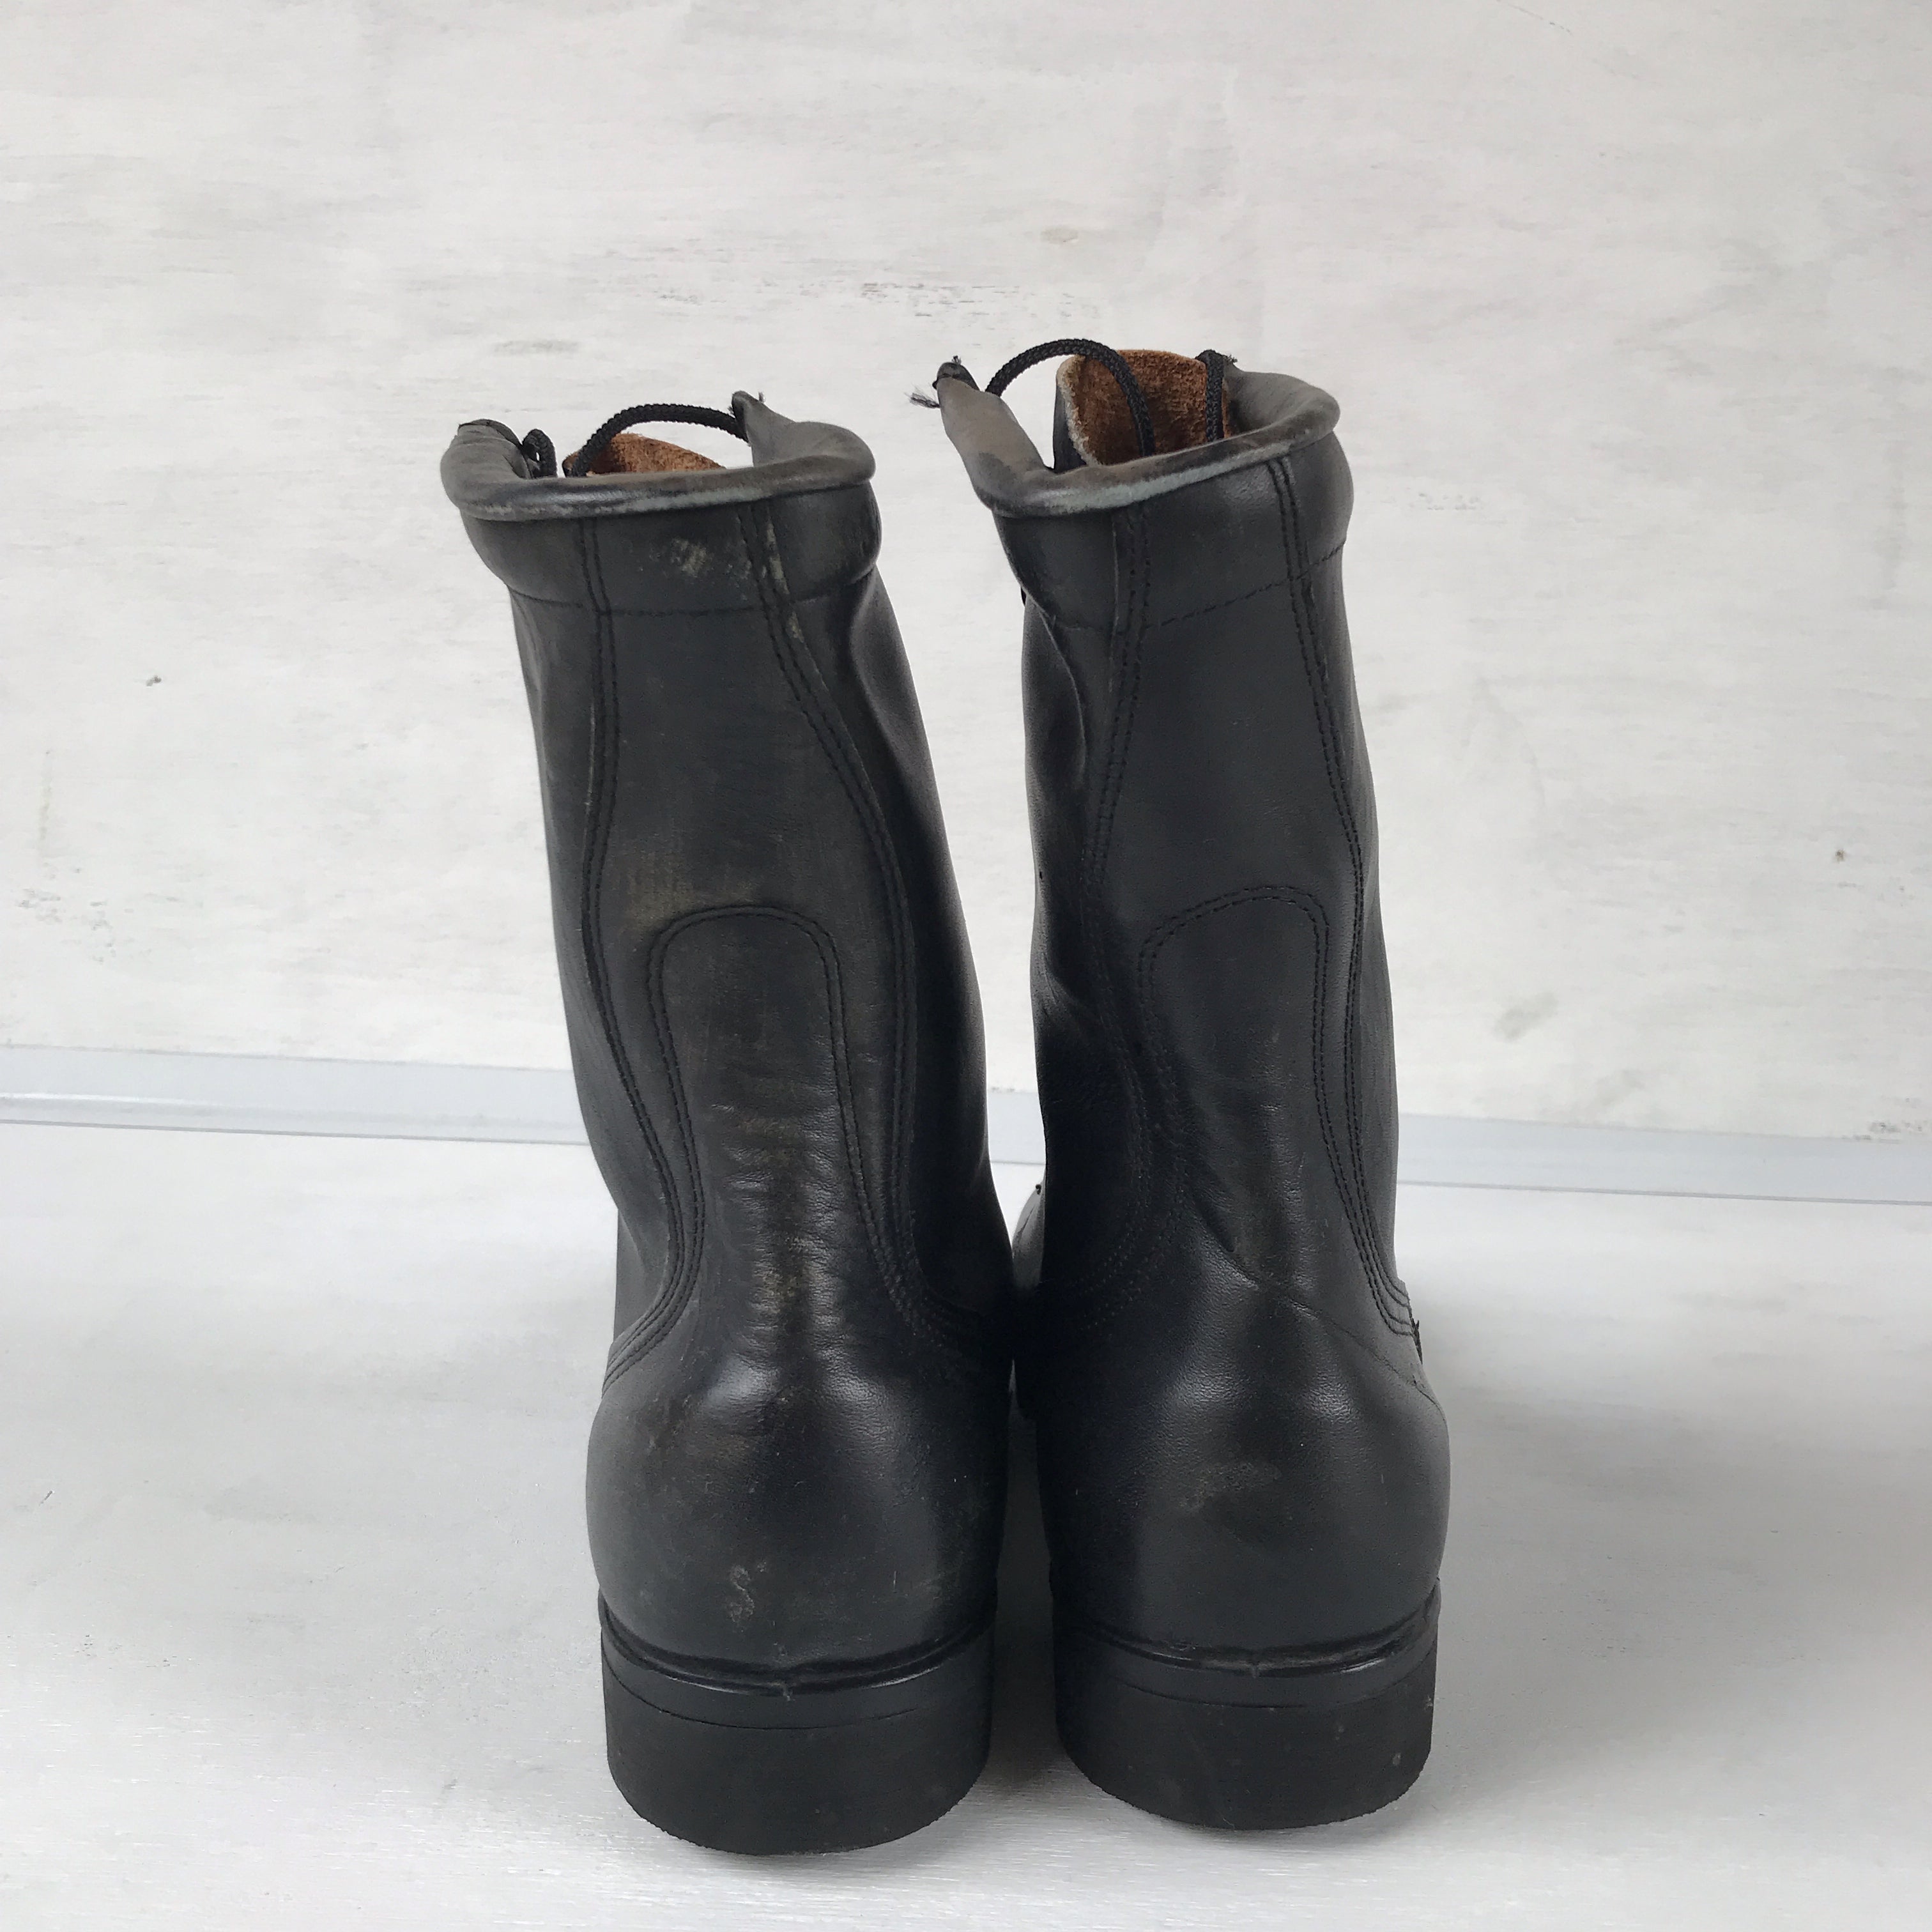 [ ONLY ONE ! ]ALTAMA LEATHER COMBAT BOOTS / U.S.MILITARY